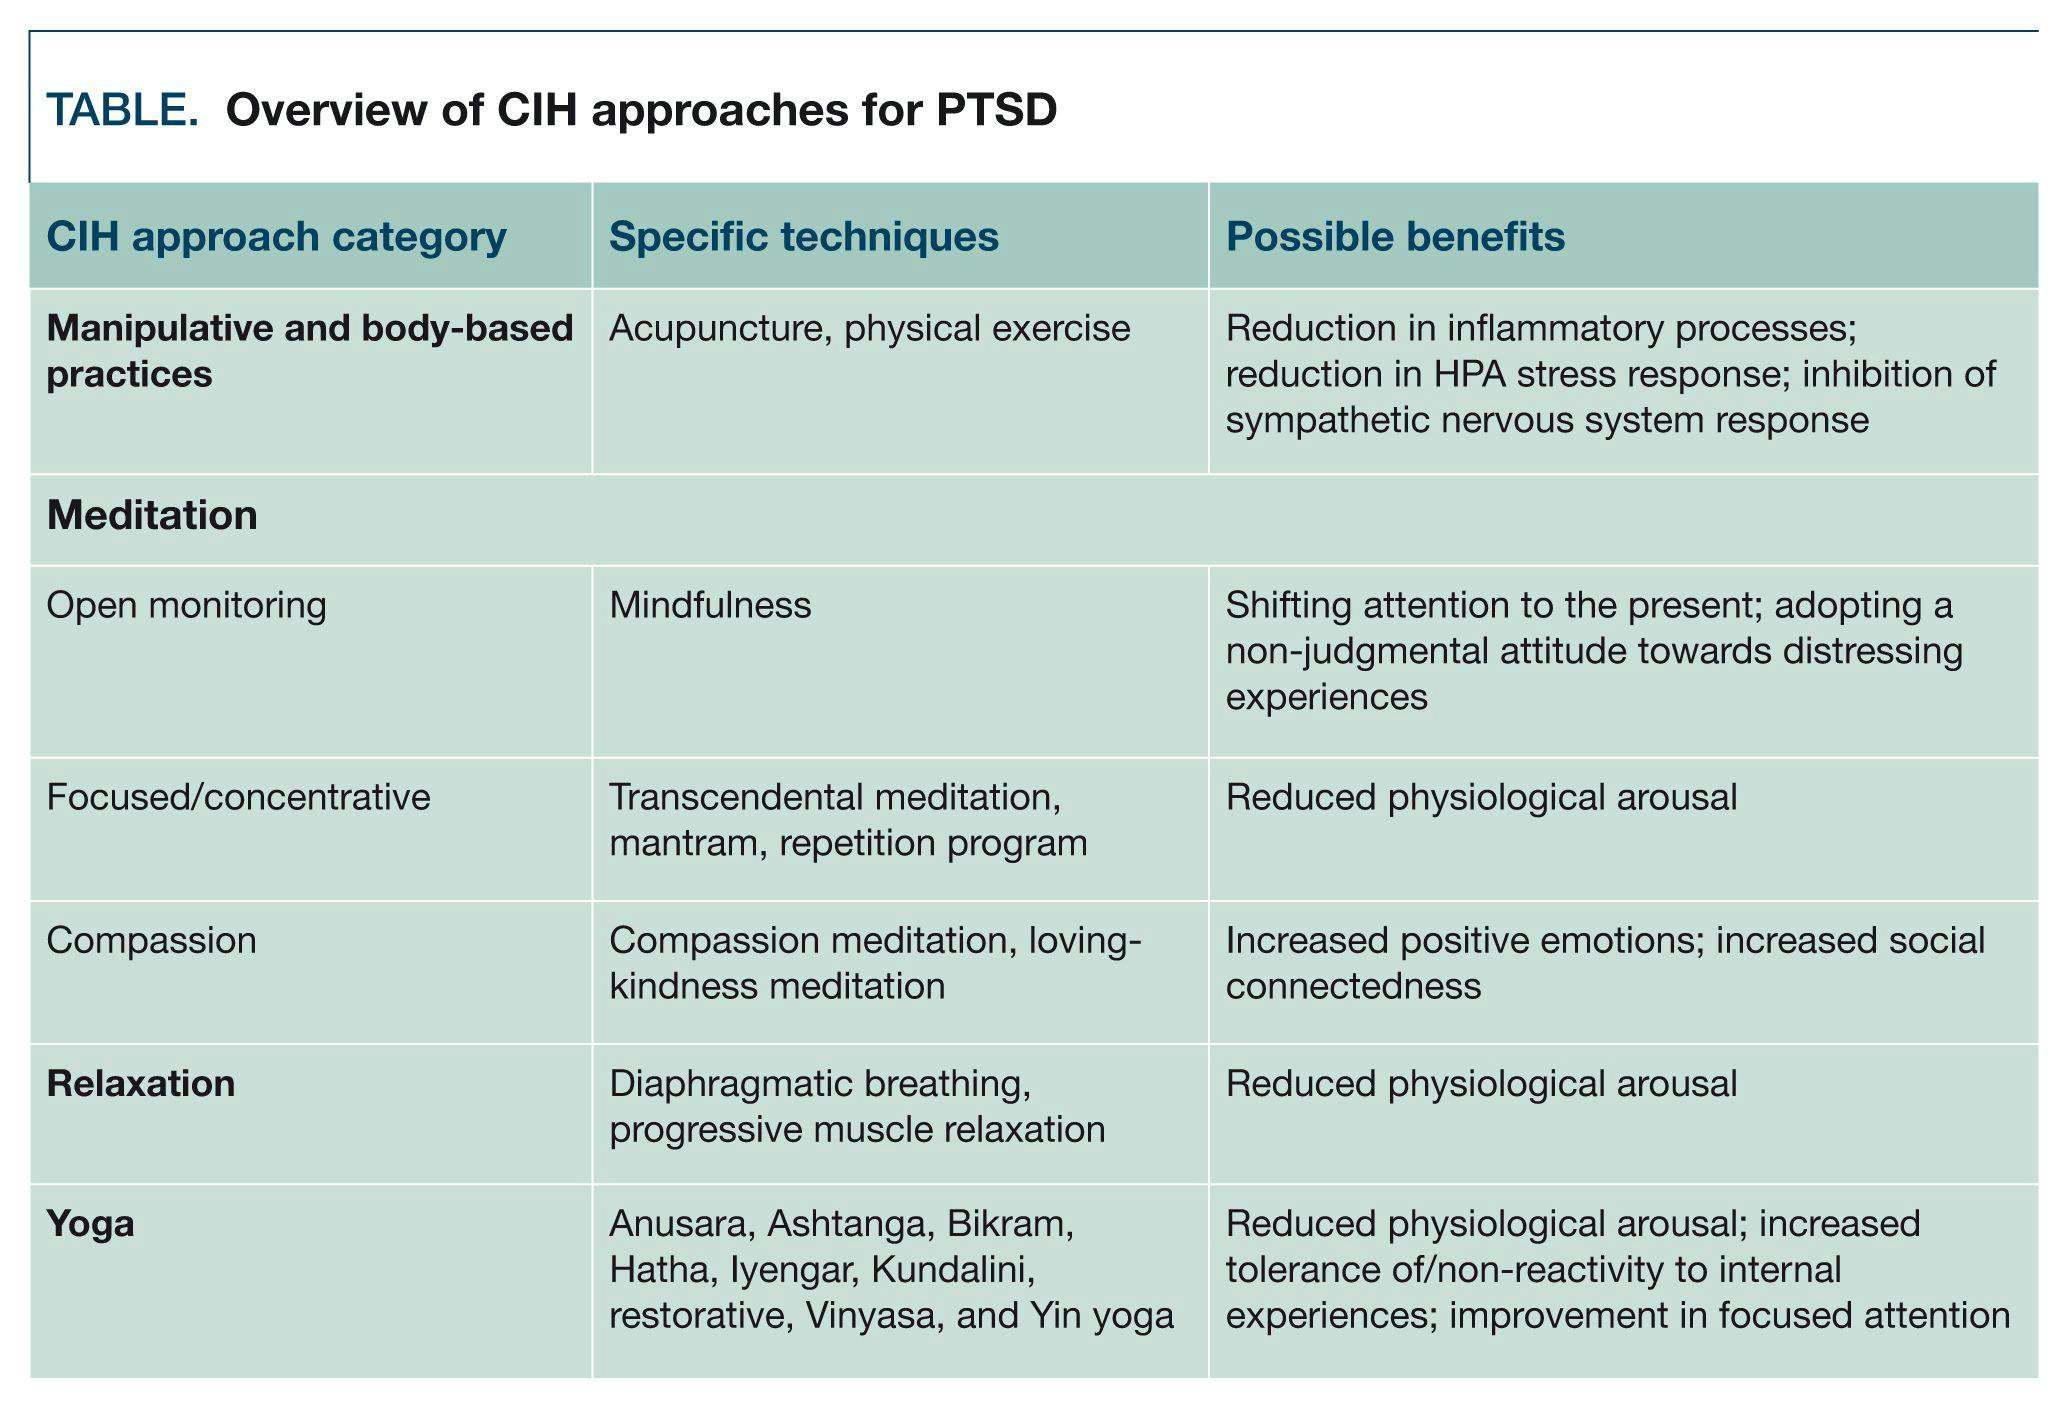 Overview of CIH approaches for PTSD